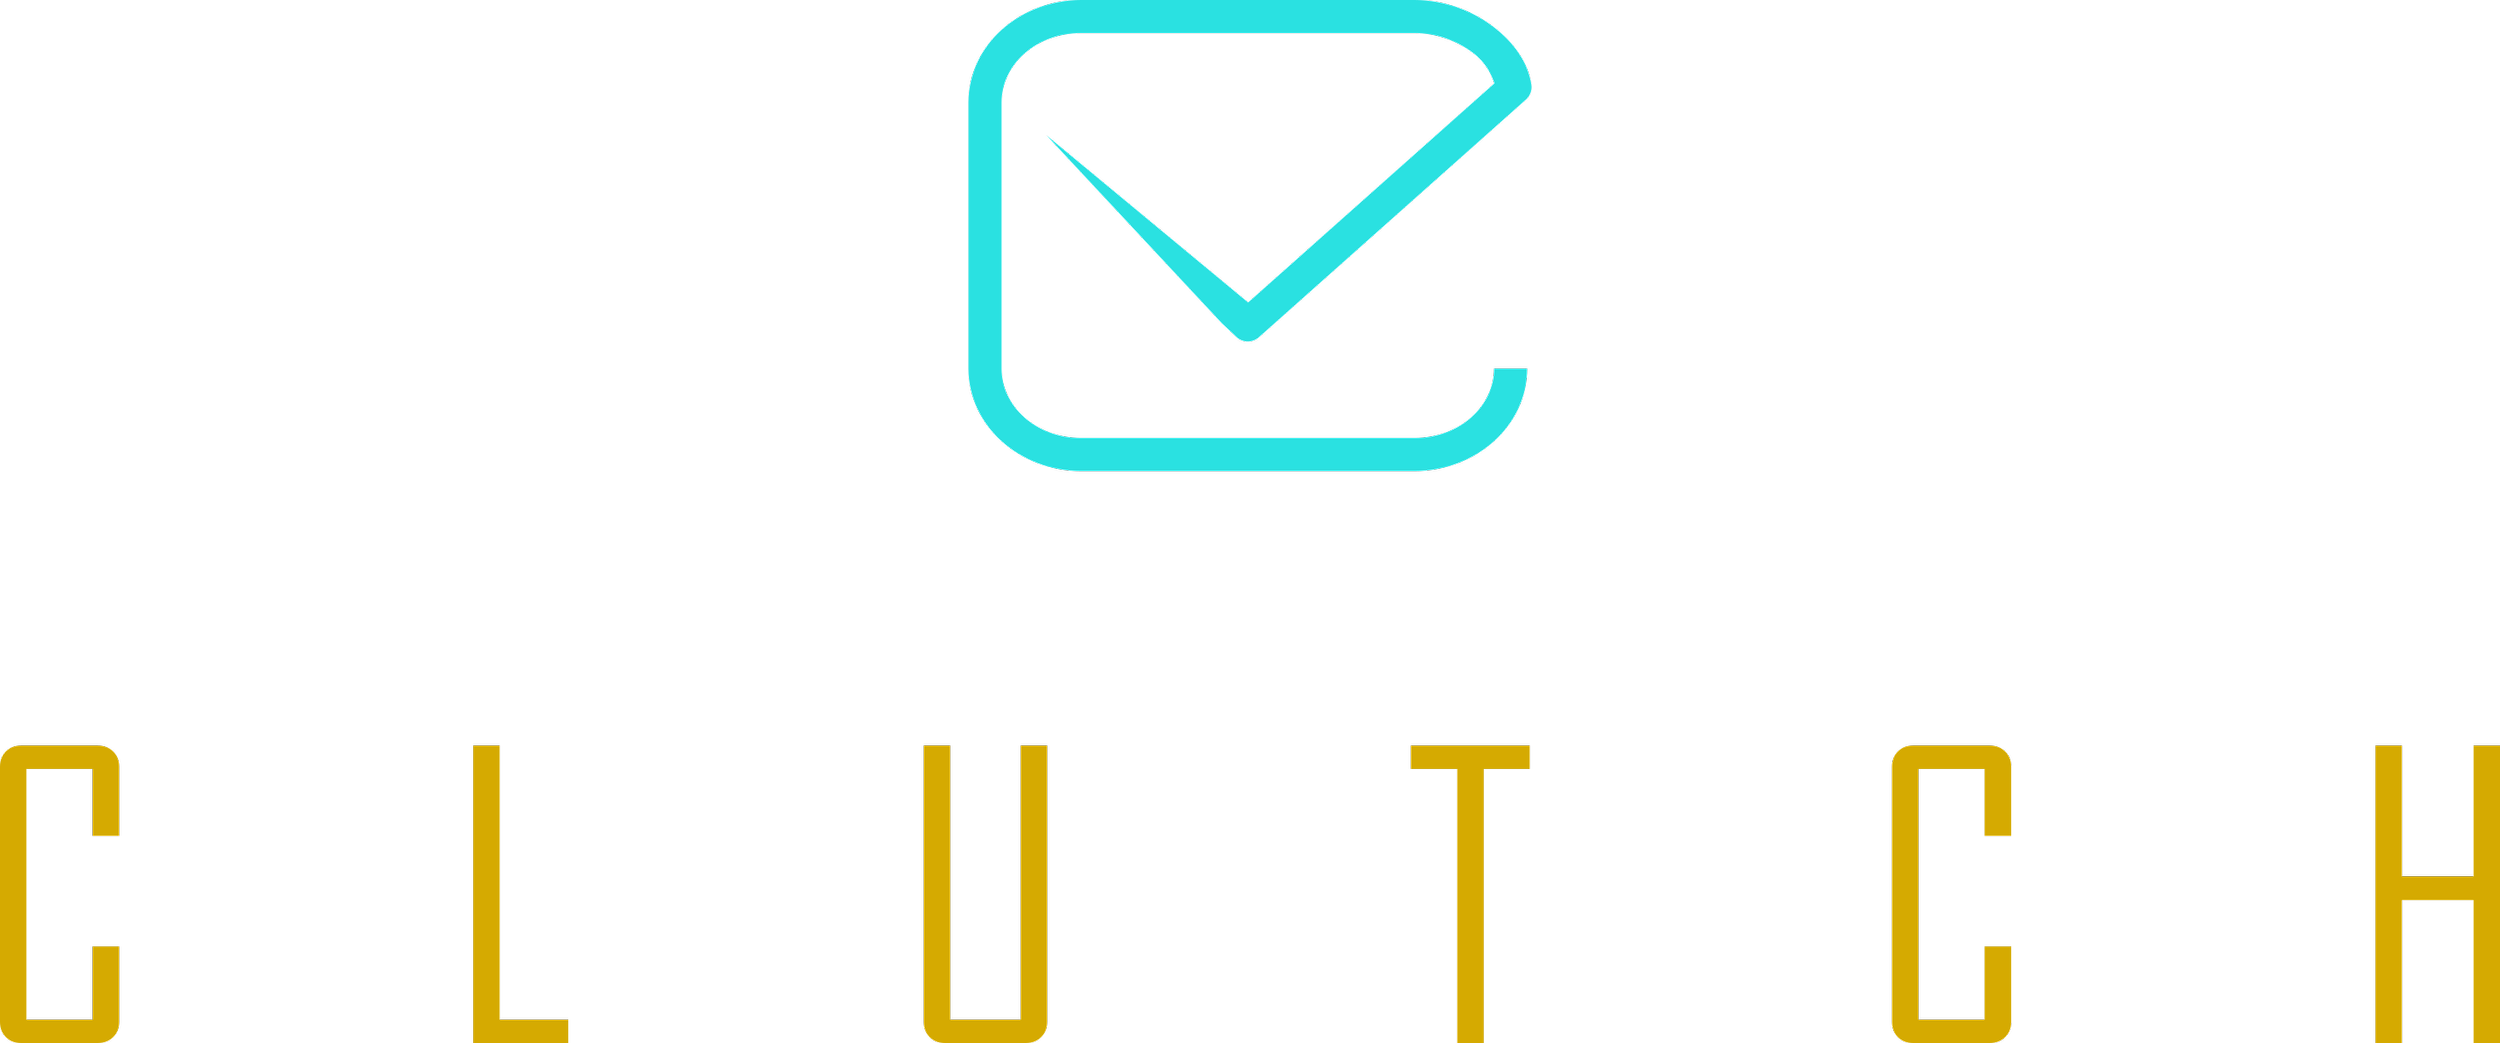 Clutch PRIMARY Logo+Teal+Gold.png